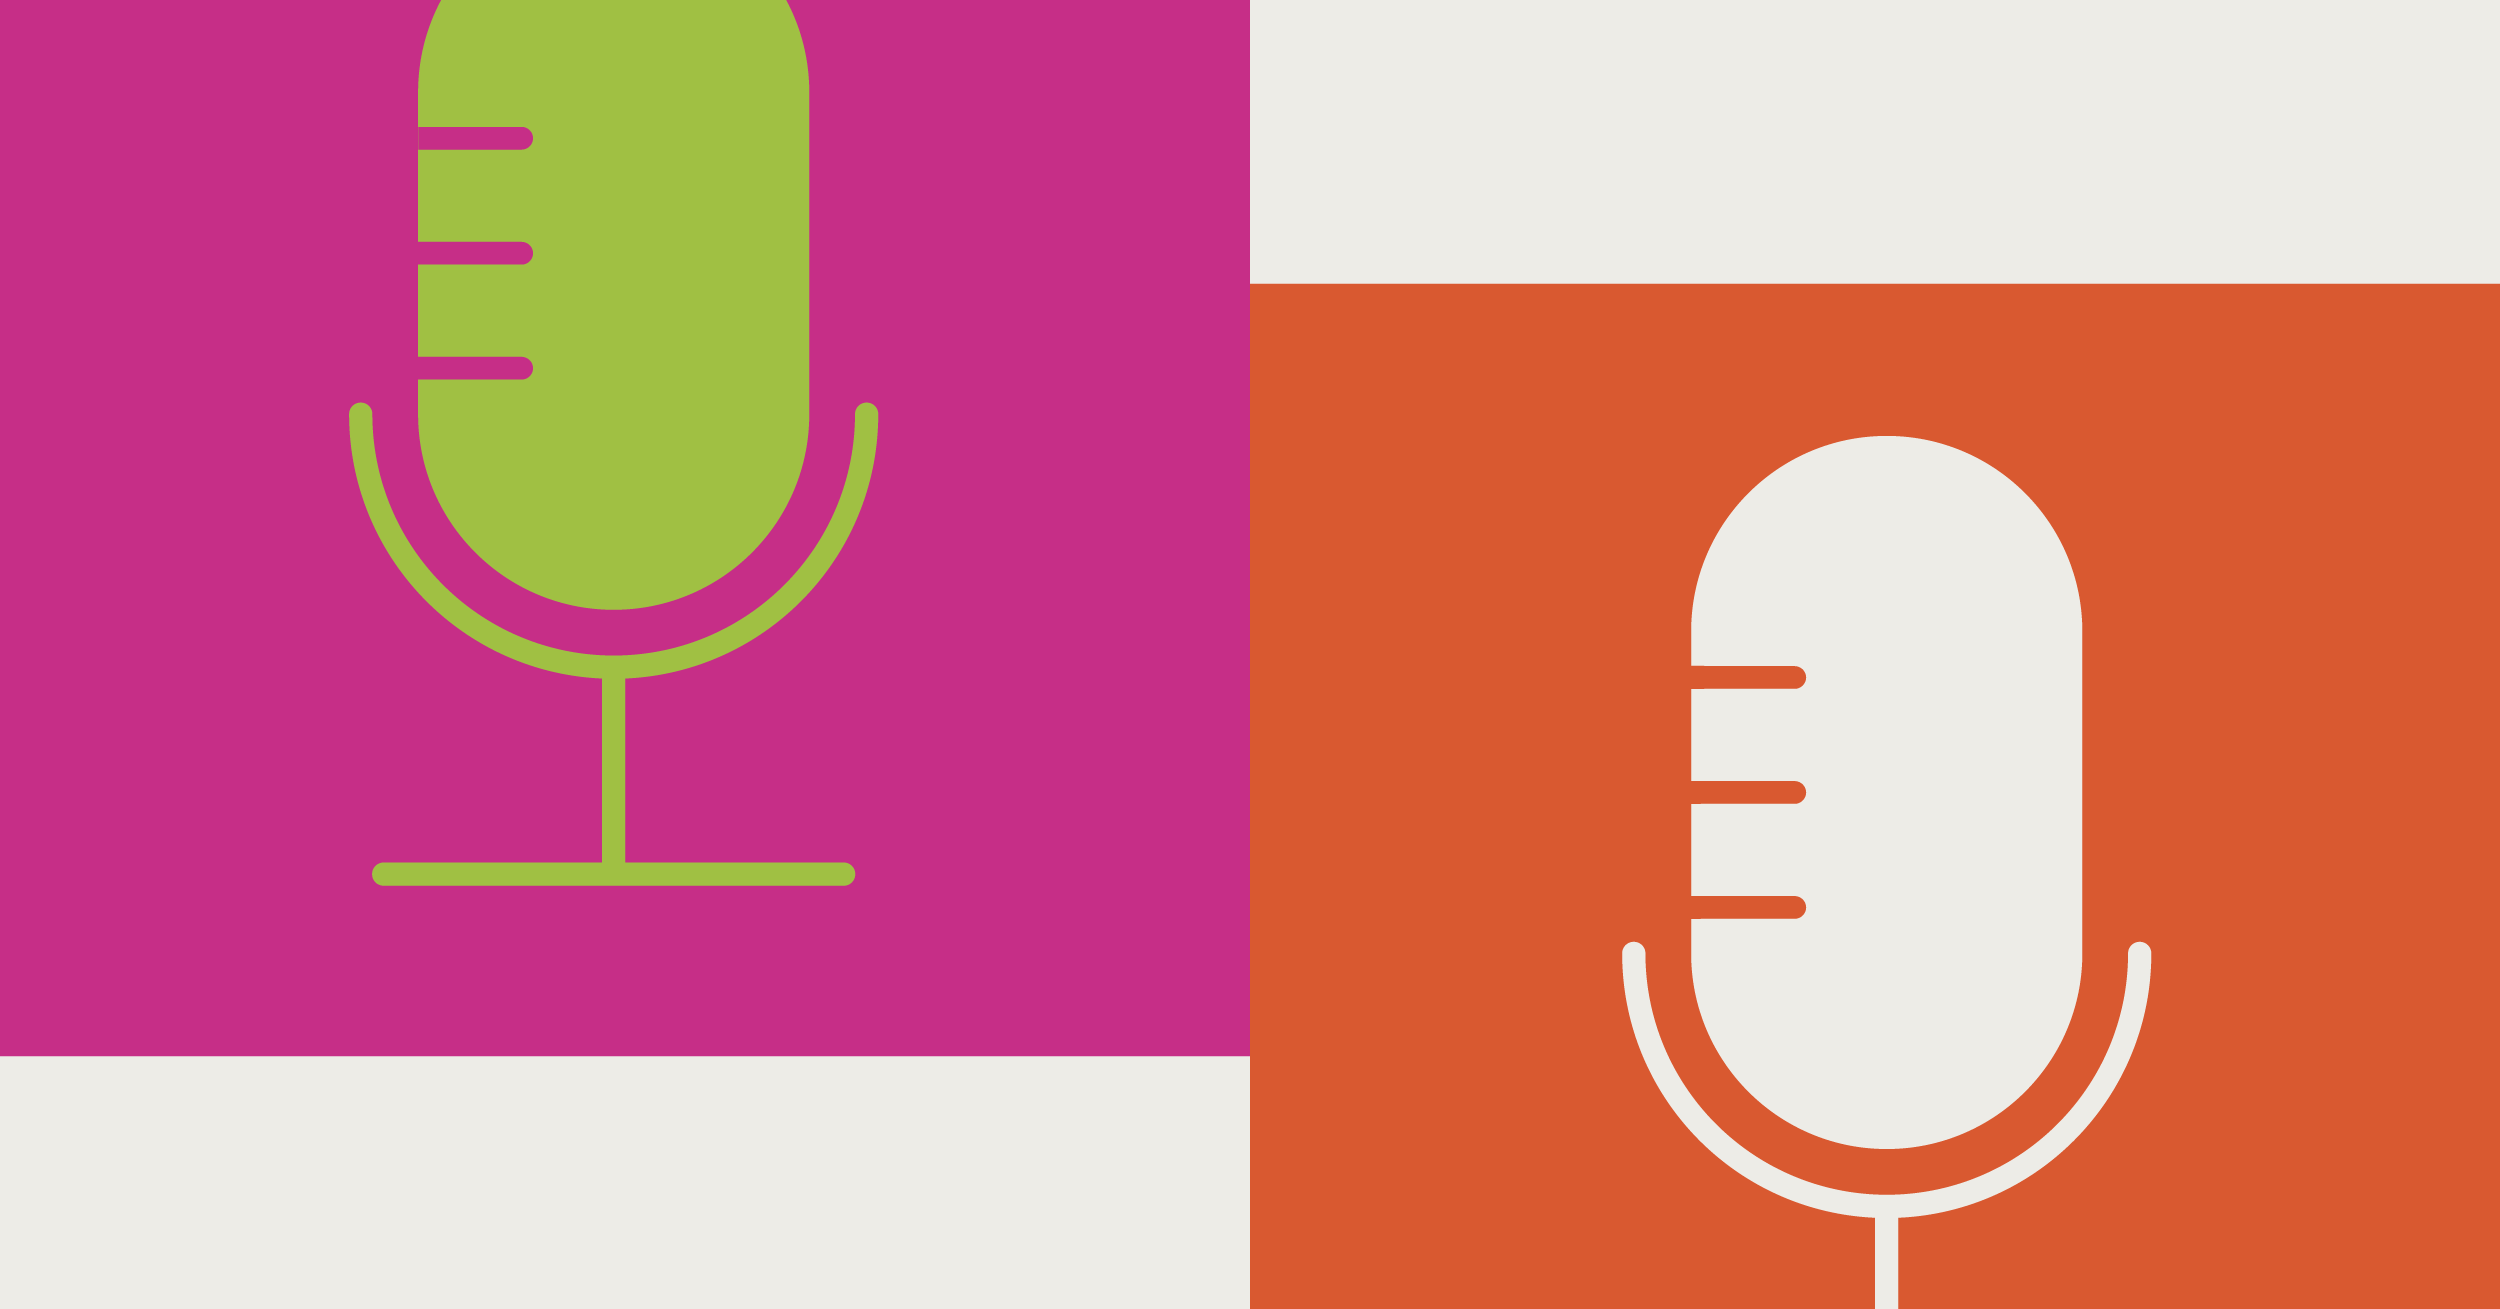 Illustration of one green microphone inside a pink box and a white microphone inside an orange box in front of a white background depicting the communications industry